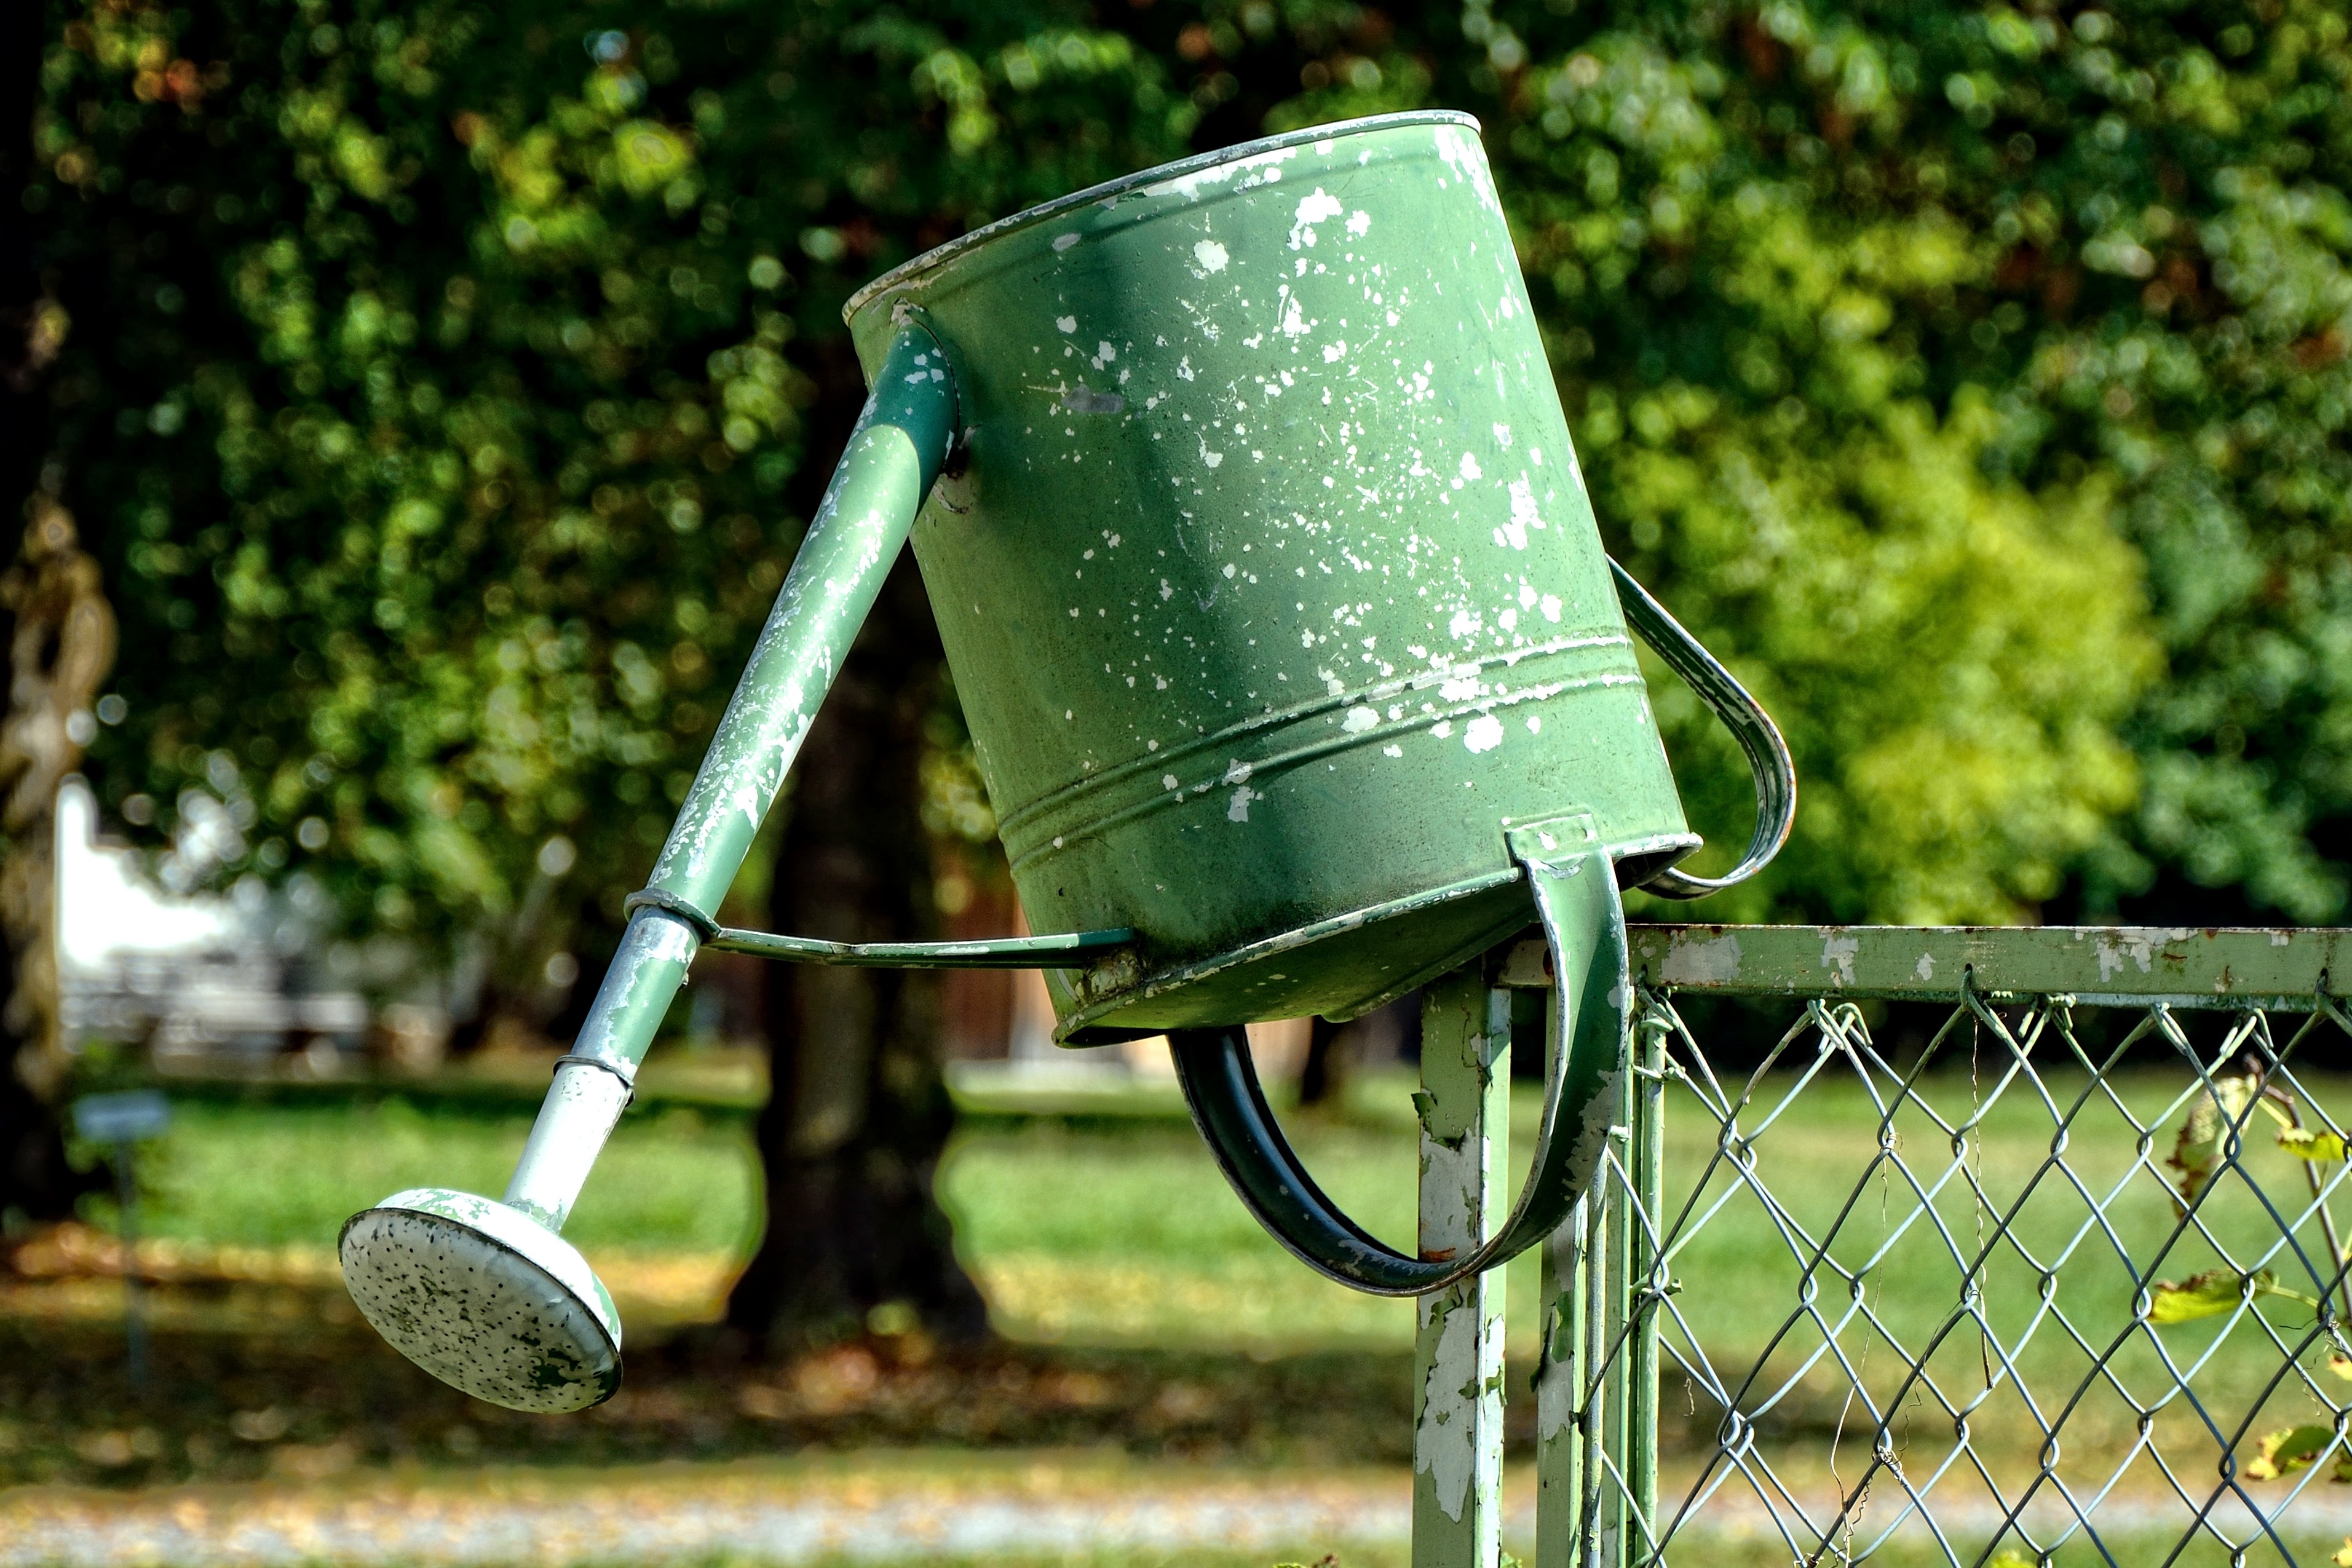 green watering can on green metal chain link fence